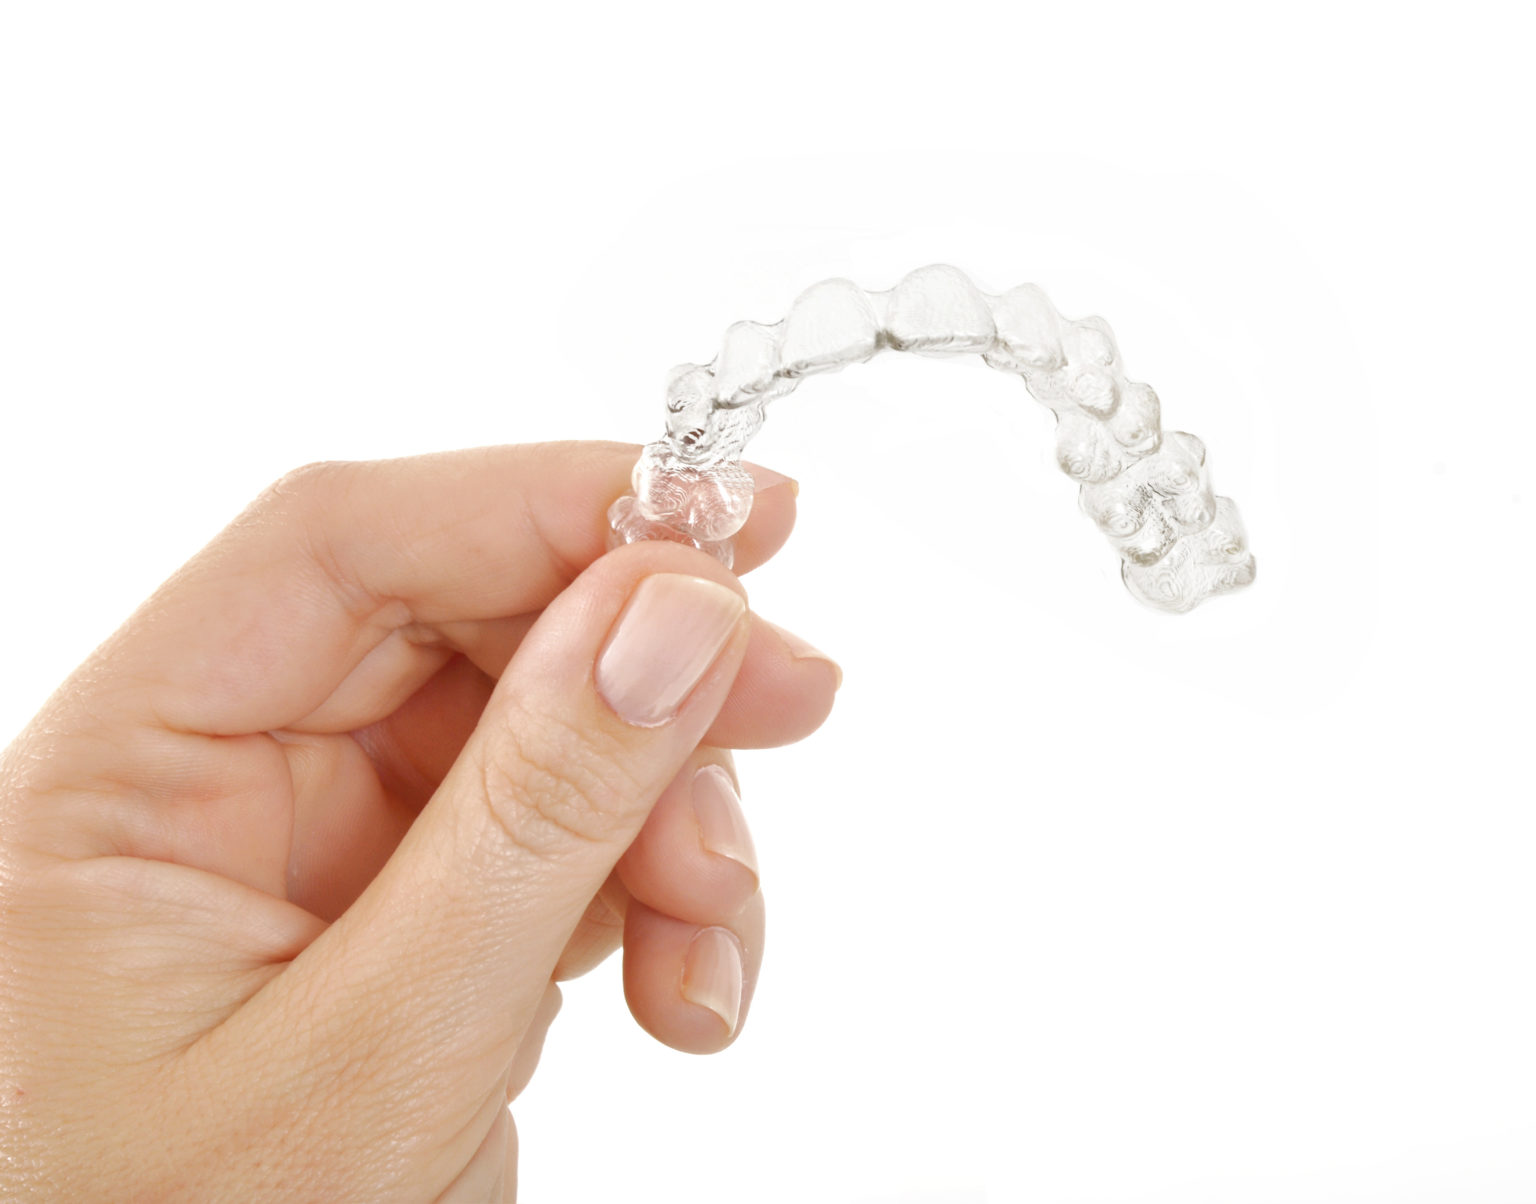 What’s The Truth About Invisalign?